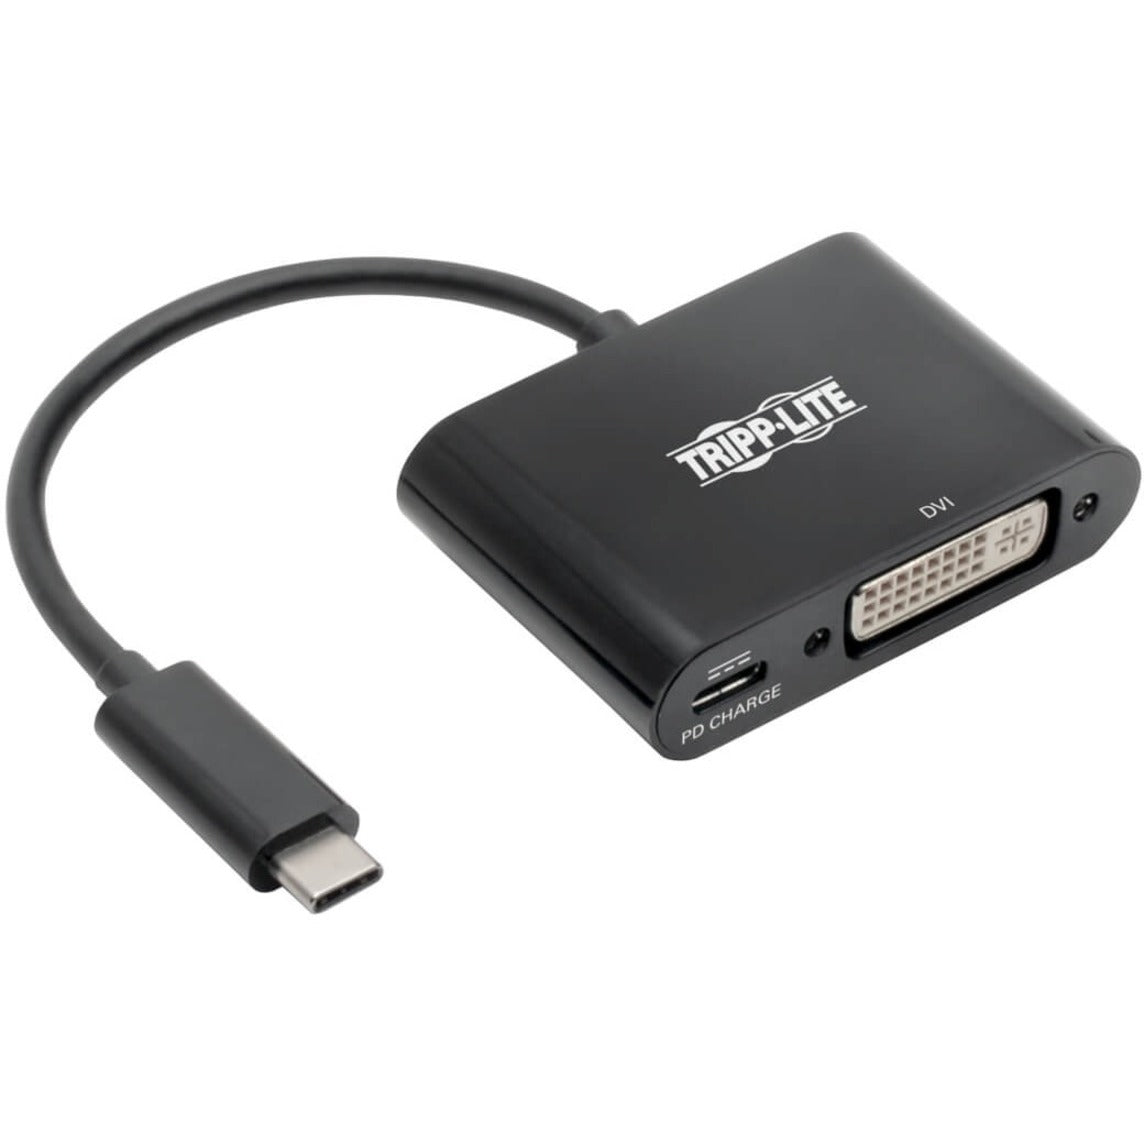 USB-C to DVI Adapter with PD Charging - USB 3.1, Thunderbolt 3, 1080p, Black [Discontinued]